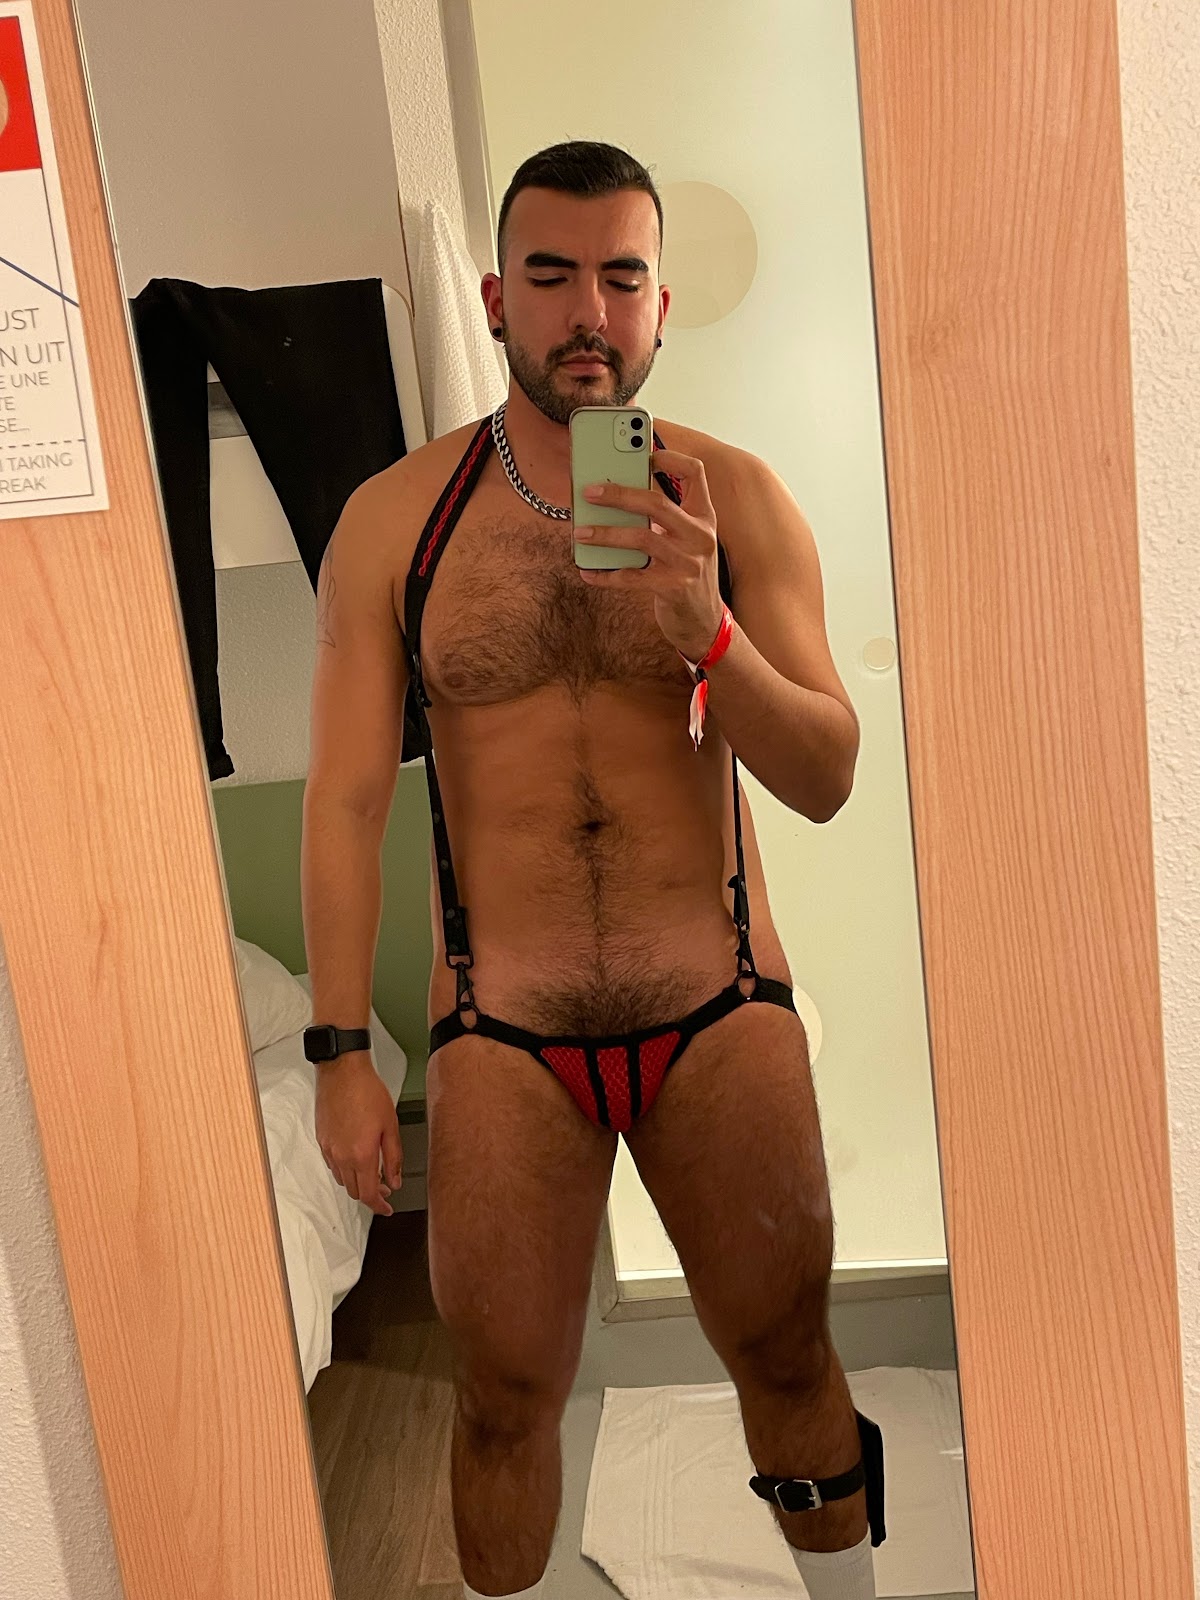 onlyfans gay content creator Phil wearing leather jock strap fetish suit with suspenders and wallet ankle harness and athletic socks taking an iphone mirror selfie